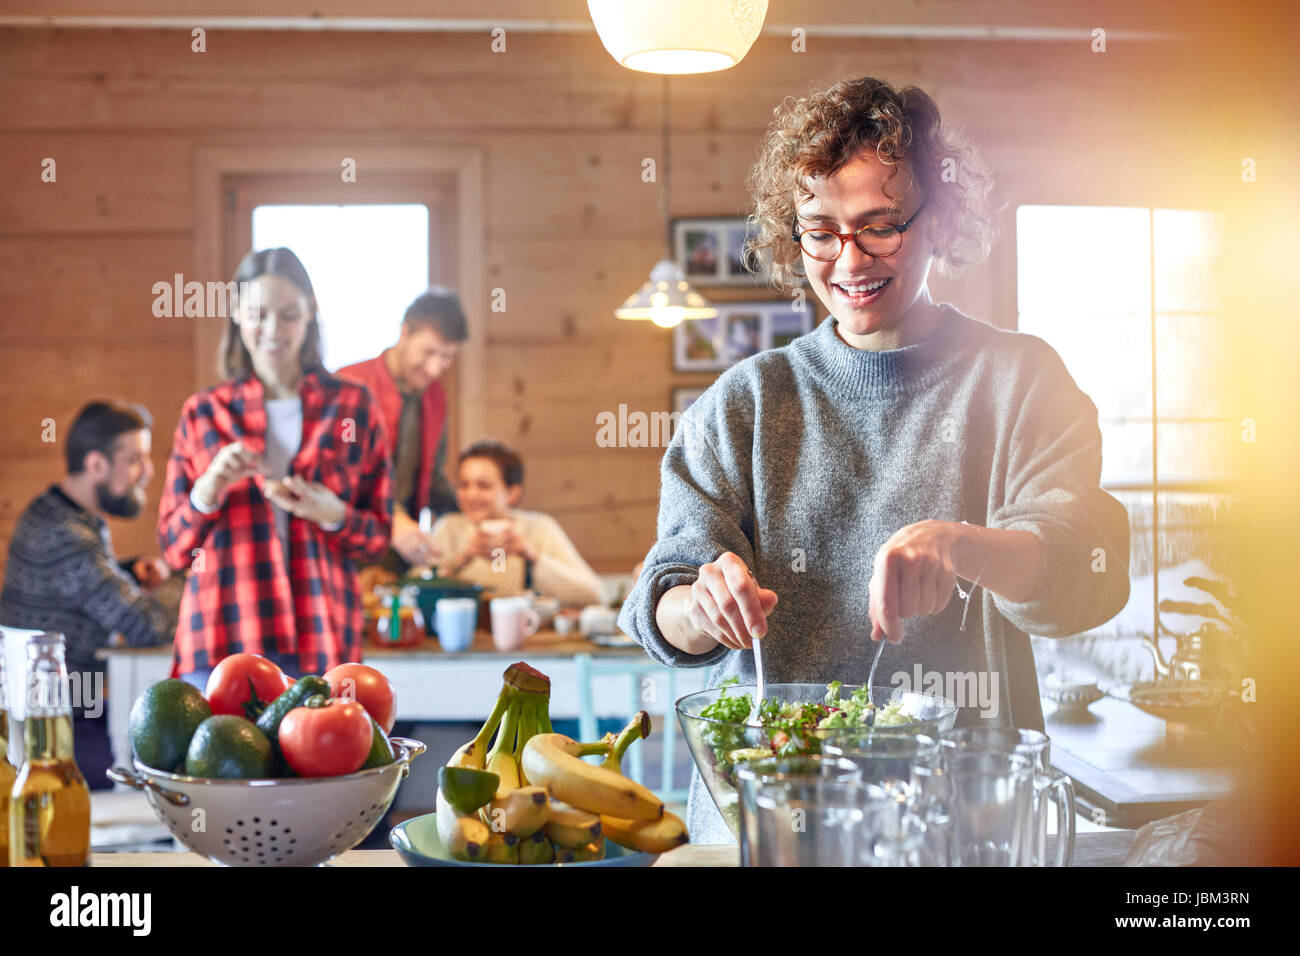 Woman tossing salad for friends in cabin Stock Photo